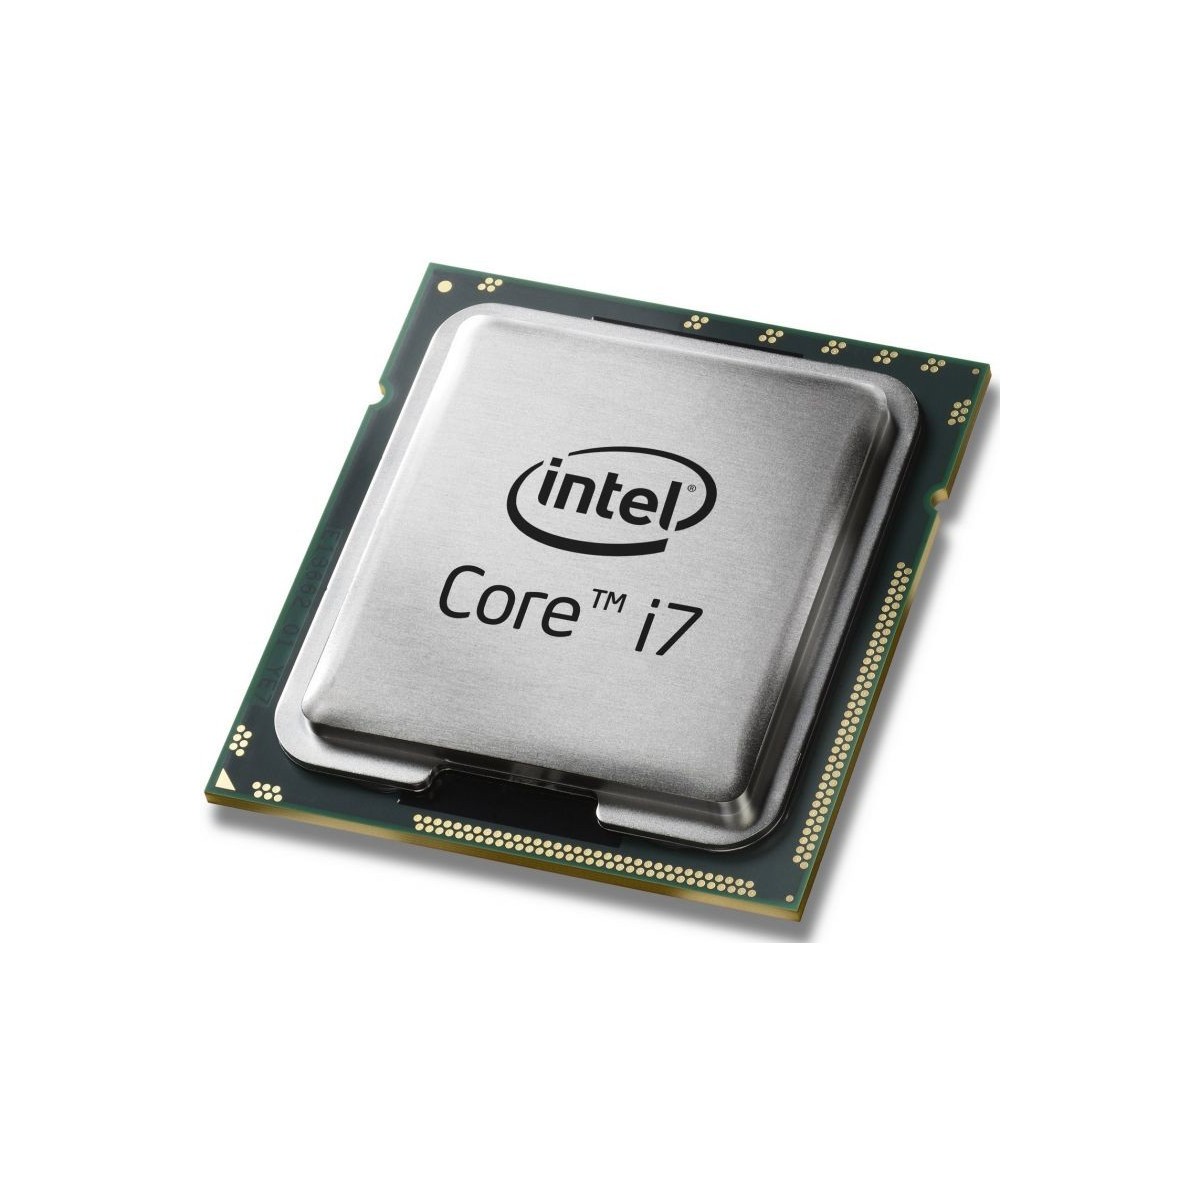 Intel Core i7-4790 Core i7 3.6 GHz - Skt 1150 Haswell 22 nm